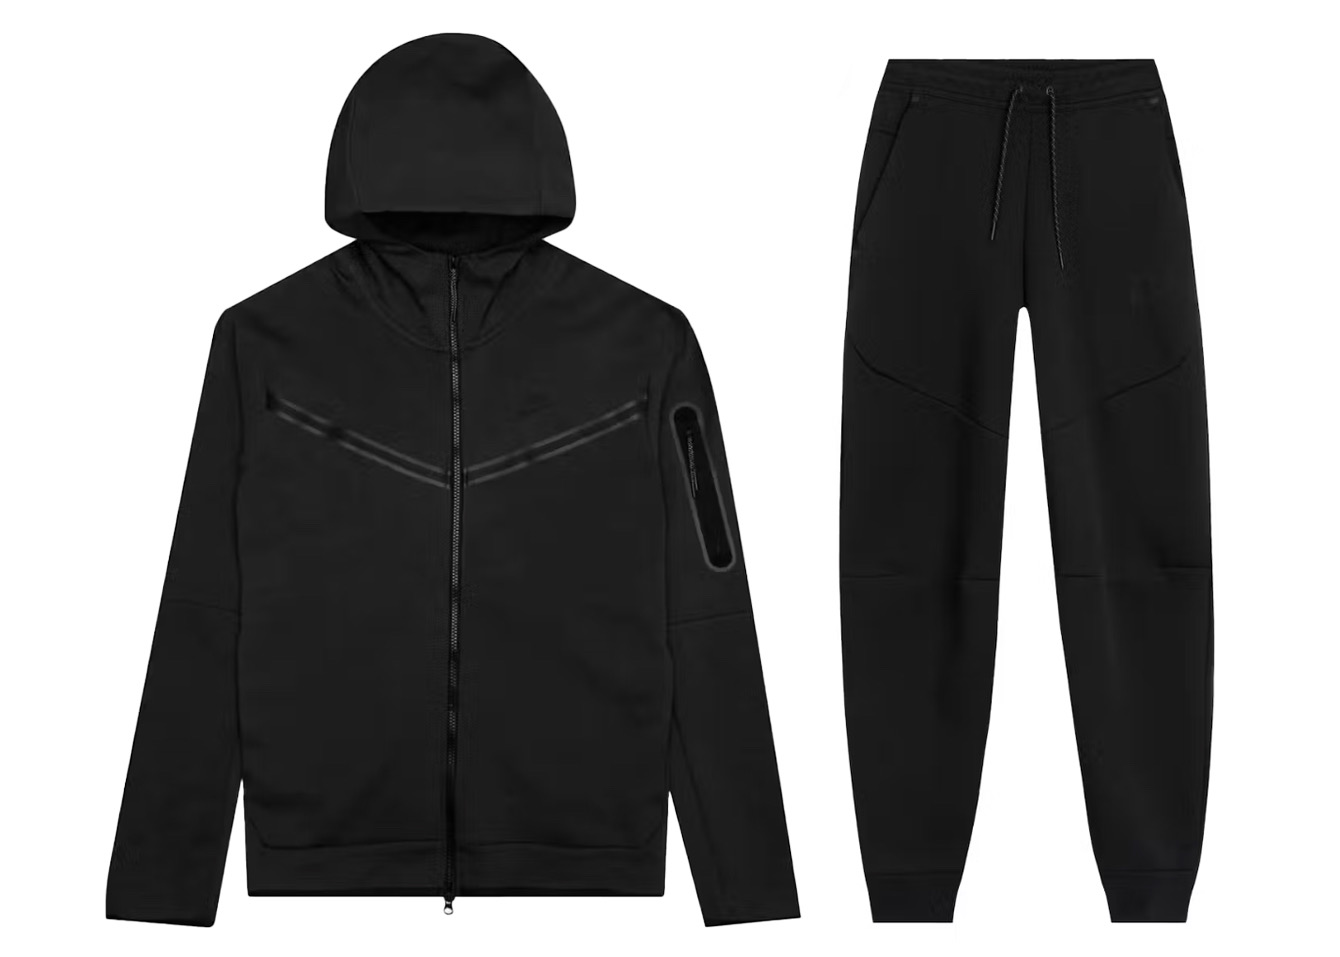 The Best Men's Nike Tech Fleece Pieces and How to Wear Them